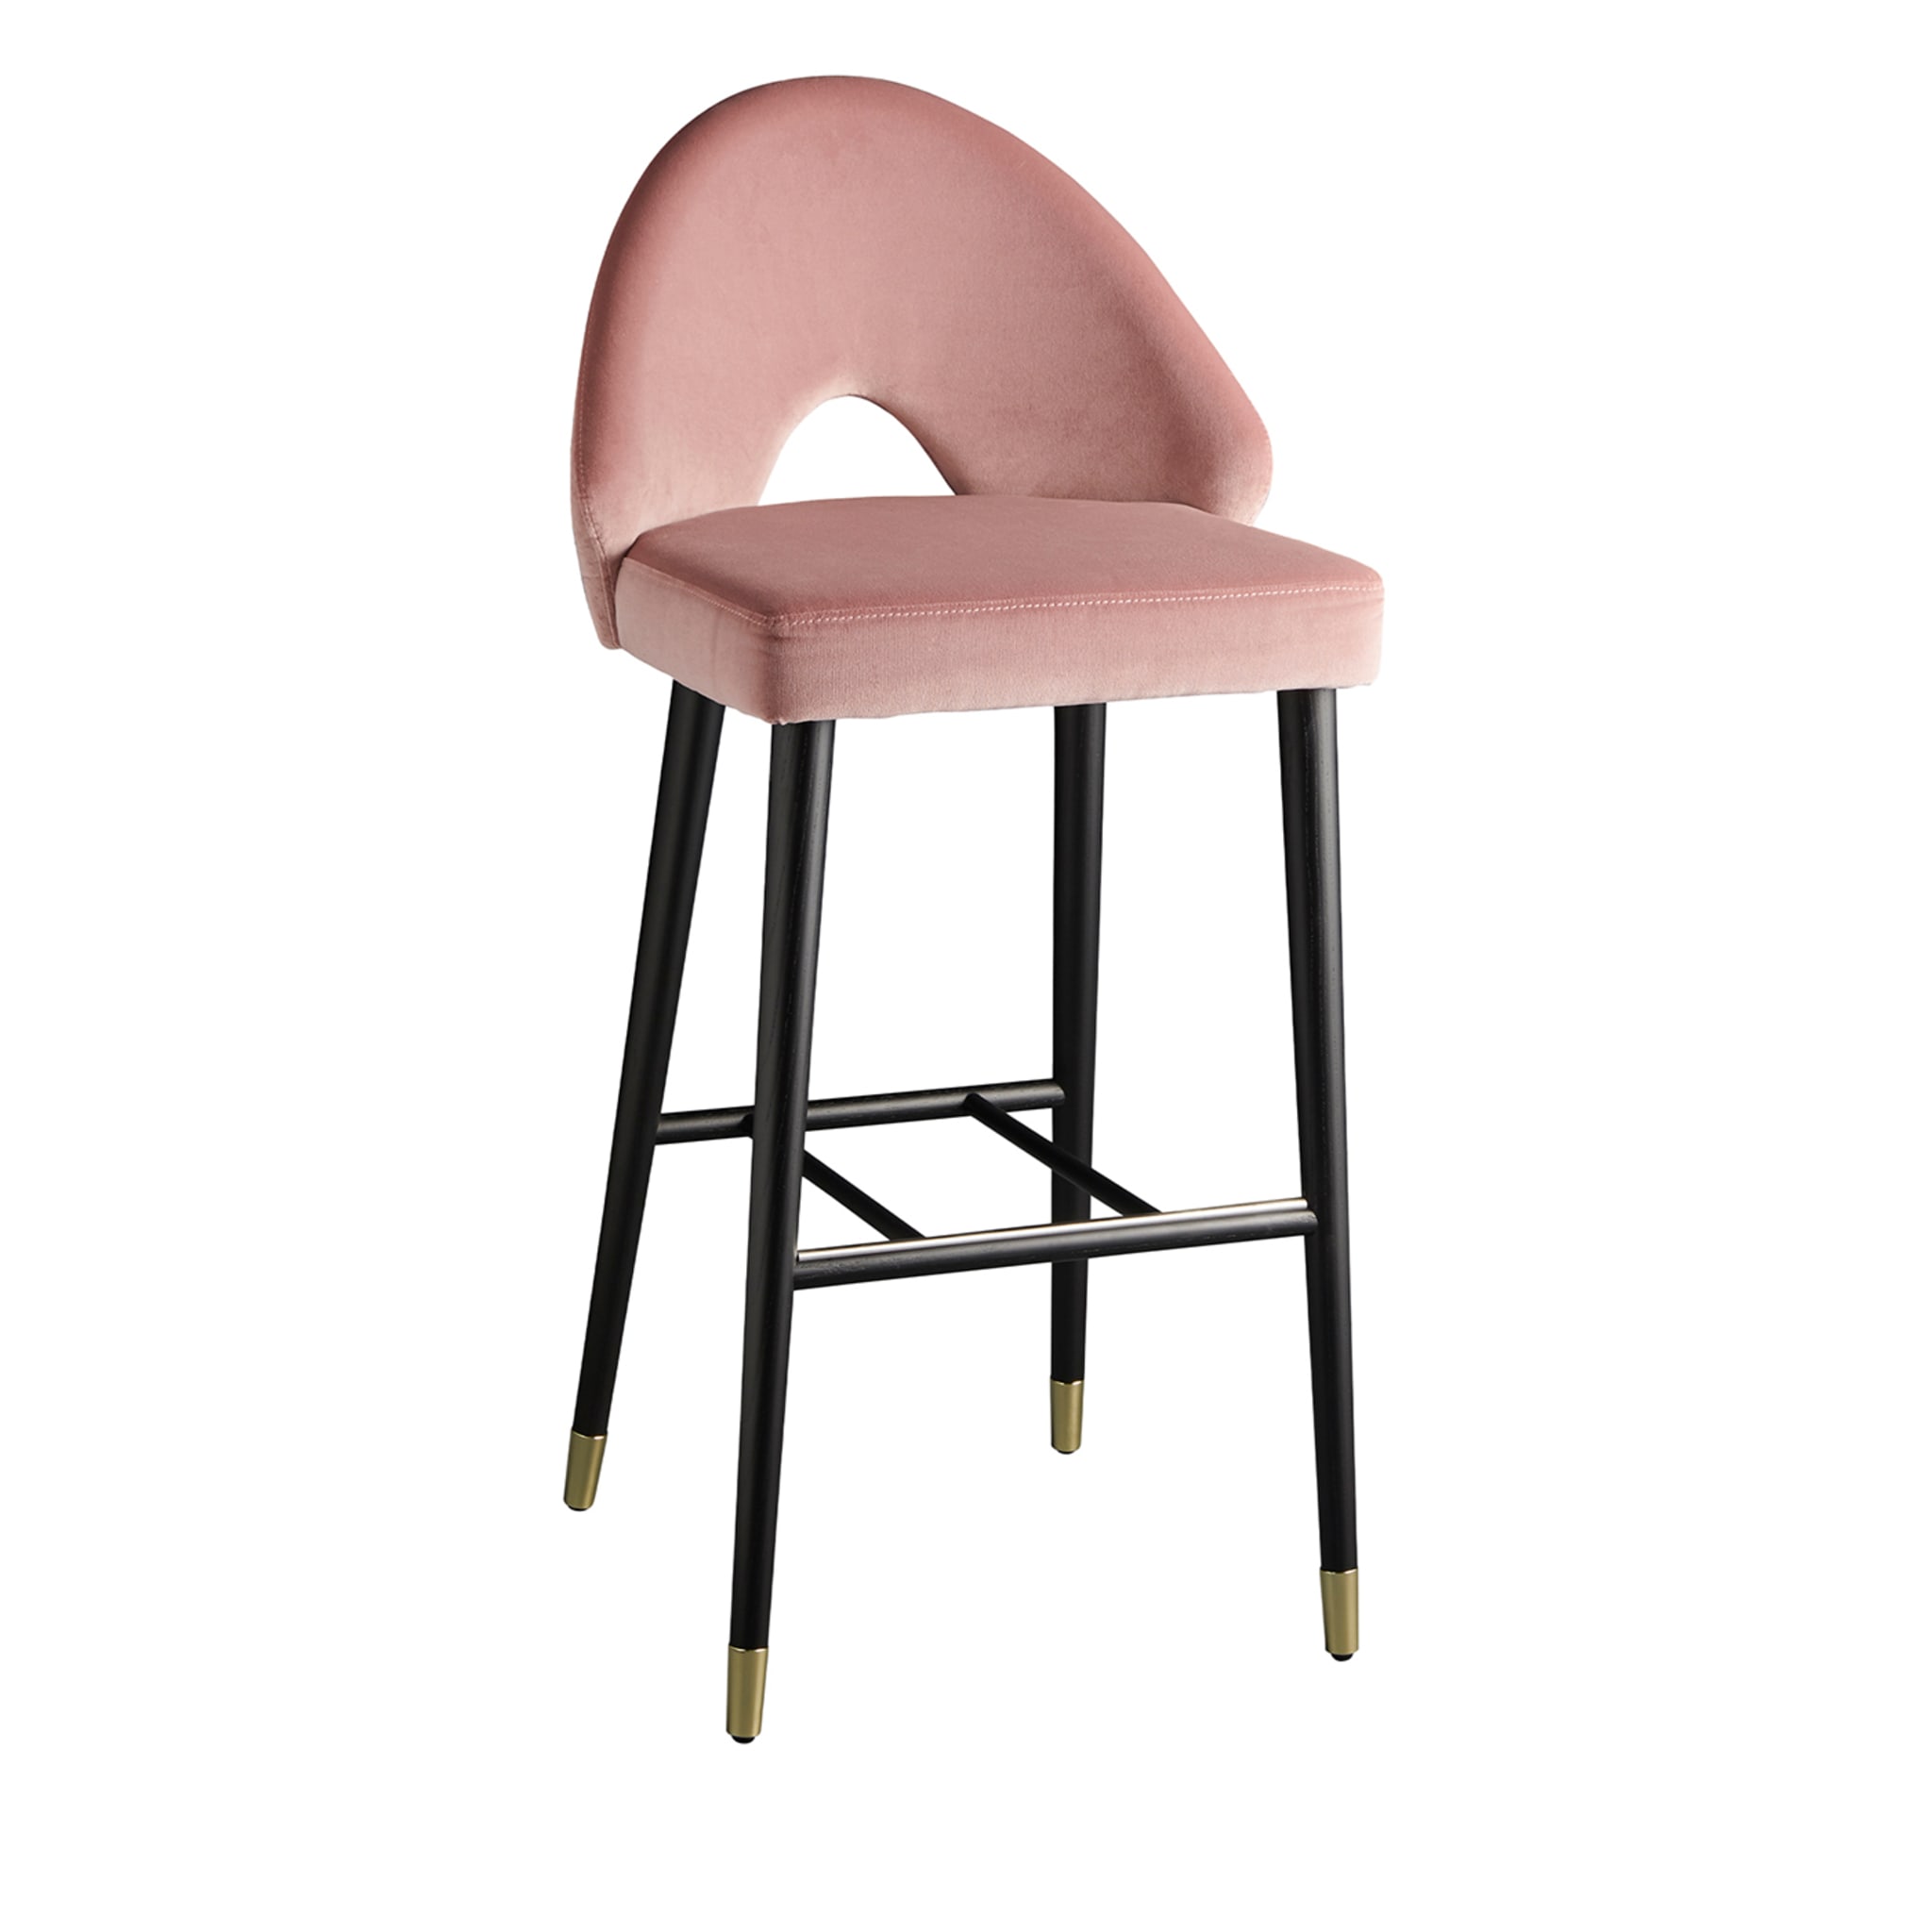 Diana.f.ss Pink & Black Stool by W. Colico - Main view